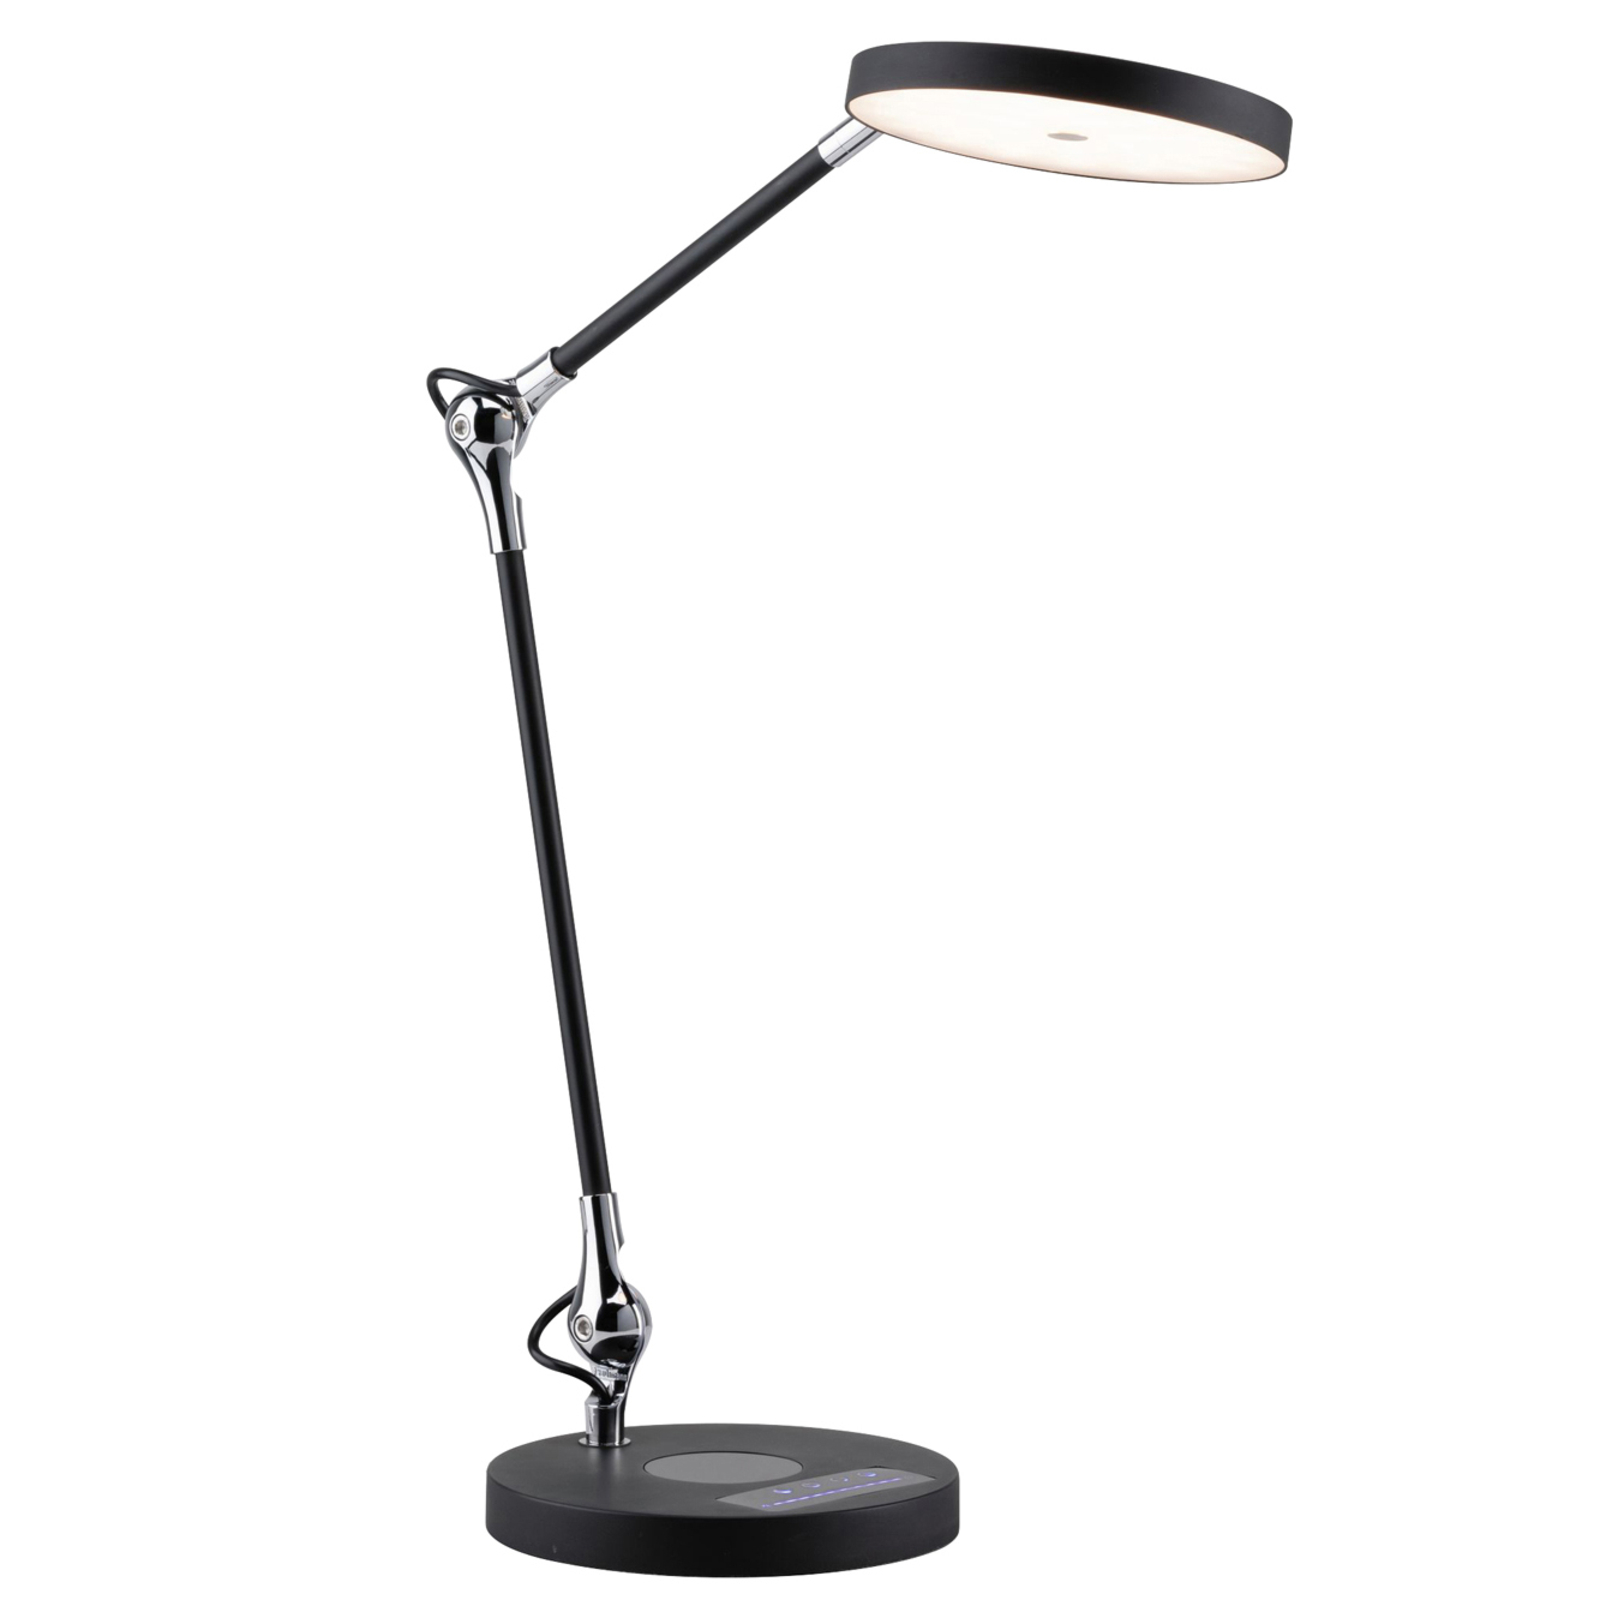 Paulmann Numis Led Table Lamp Charging, How To Put A Table Lamp Together